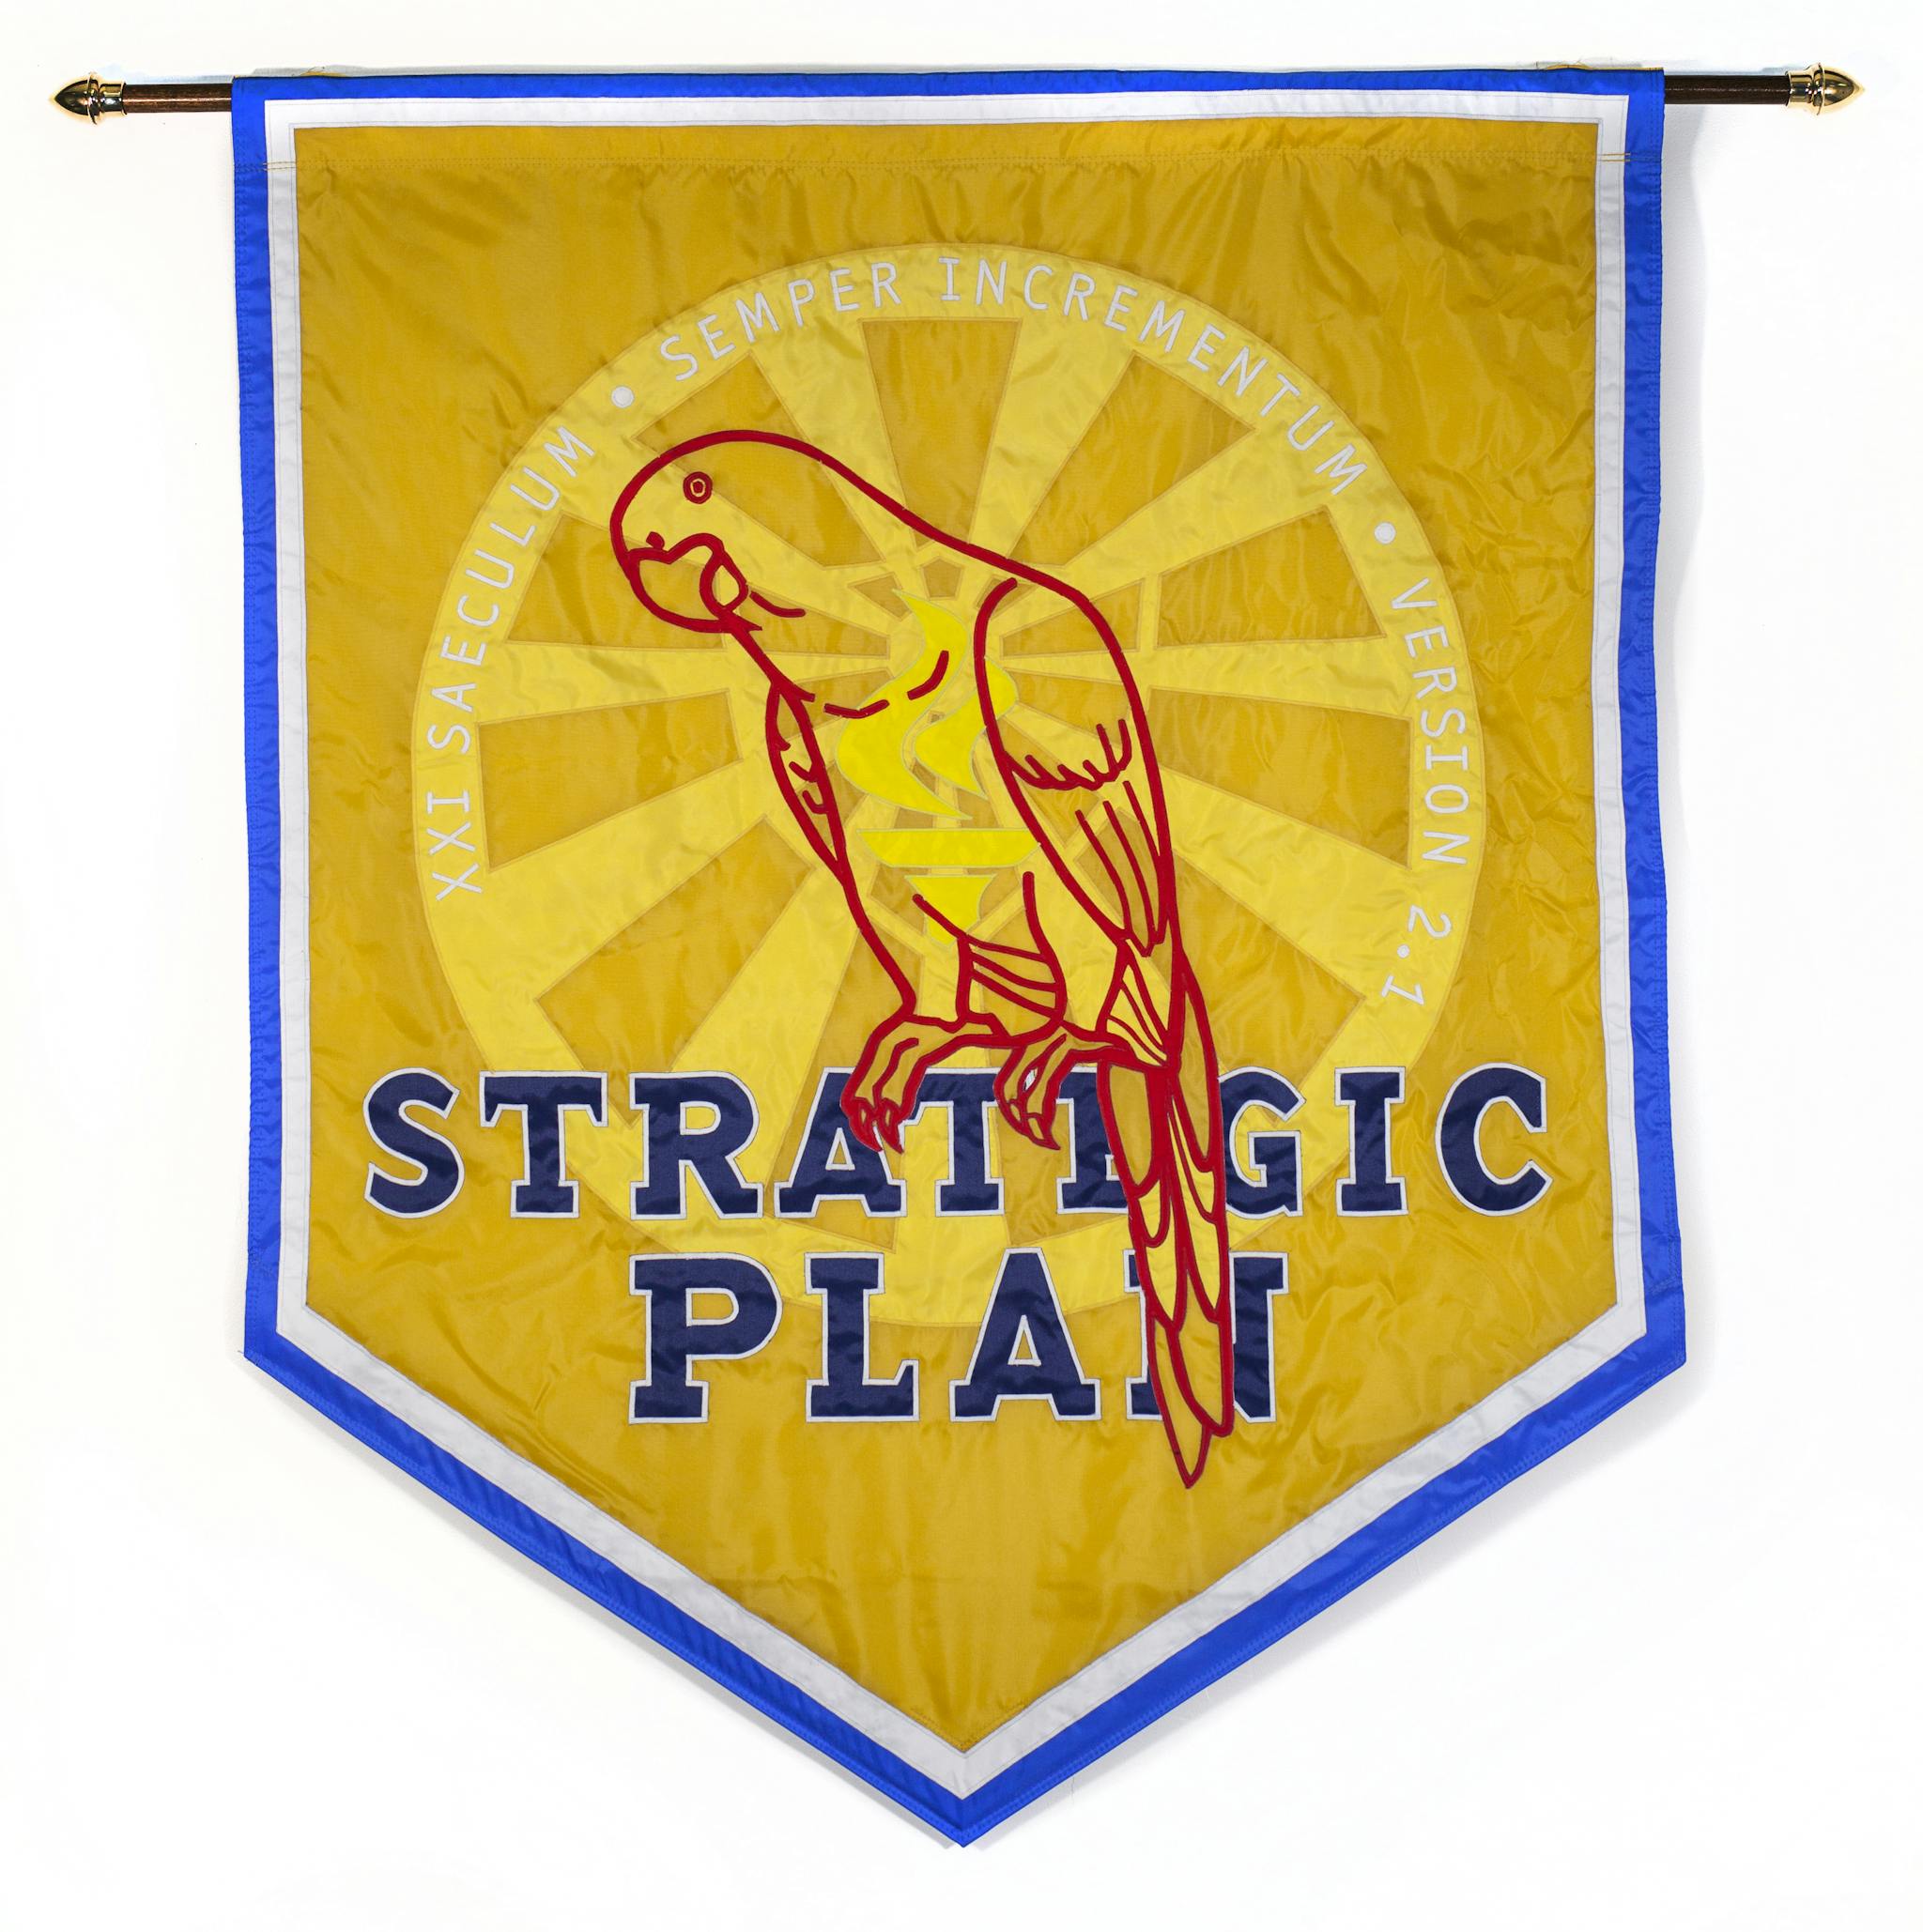 Image of one of Chantal Zakari's flags with a yellow background, blue trim, and a bird outlined in red at the foreground.